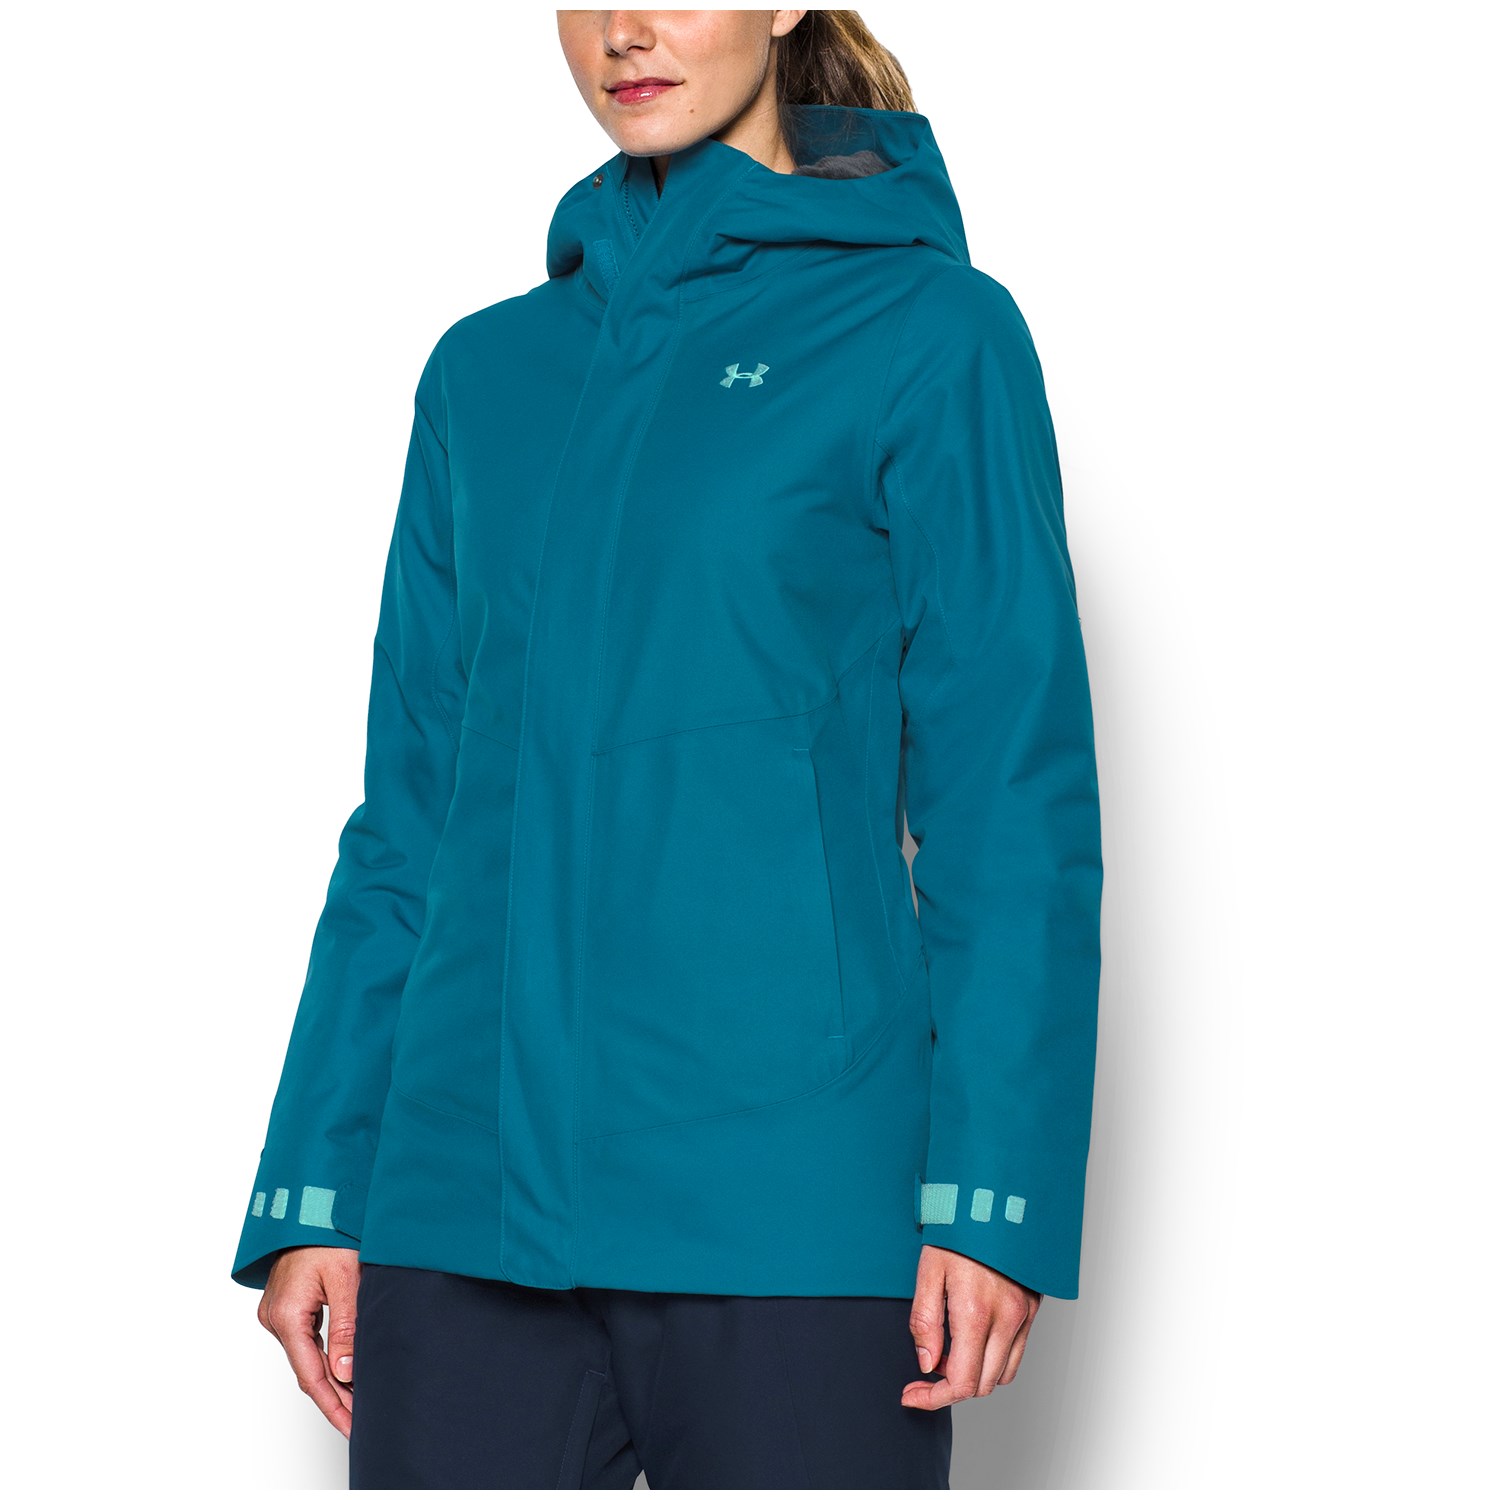 Under Armour ColdGear Infrared Track Jackets for Women